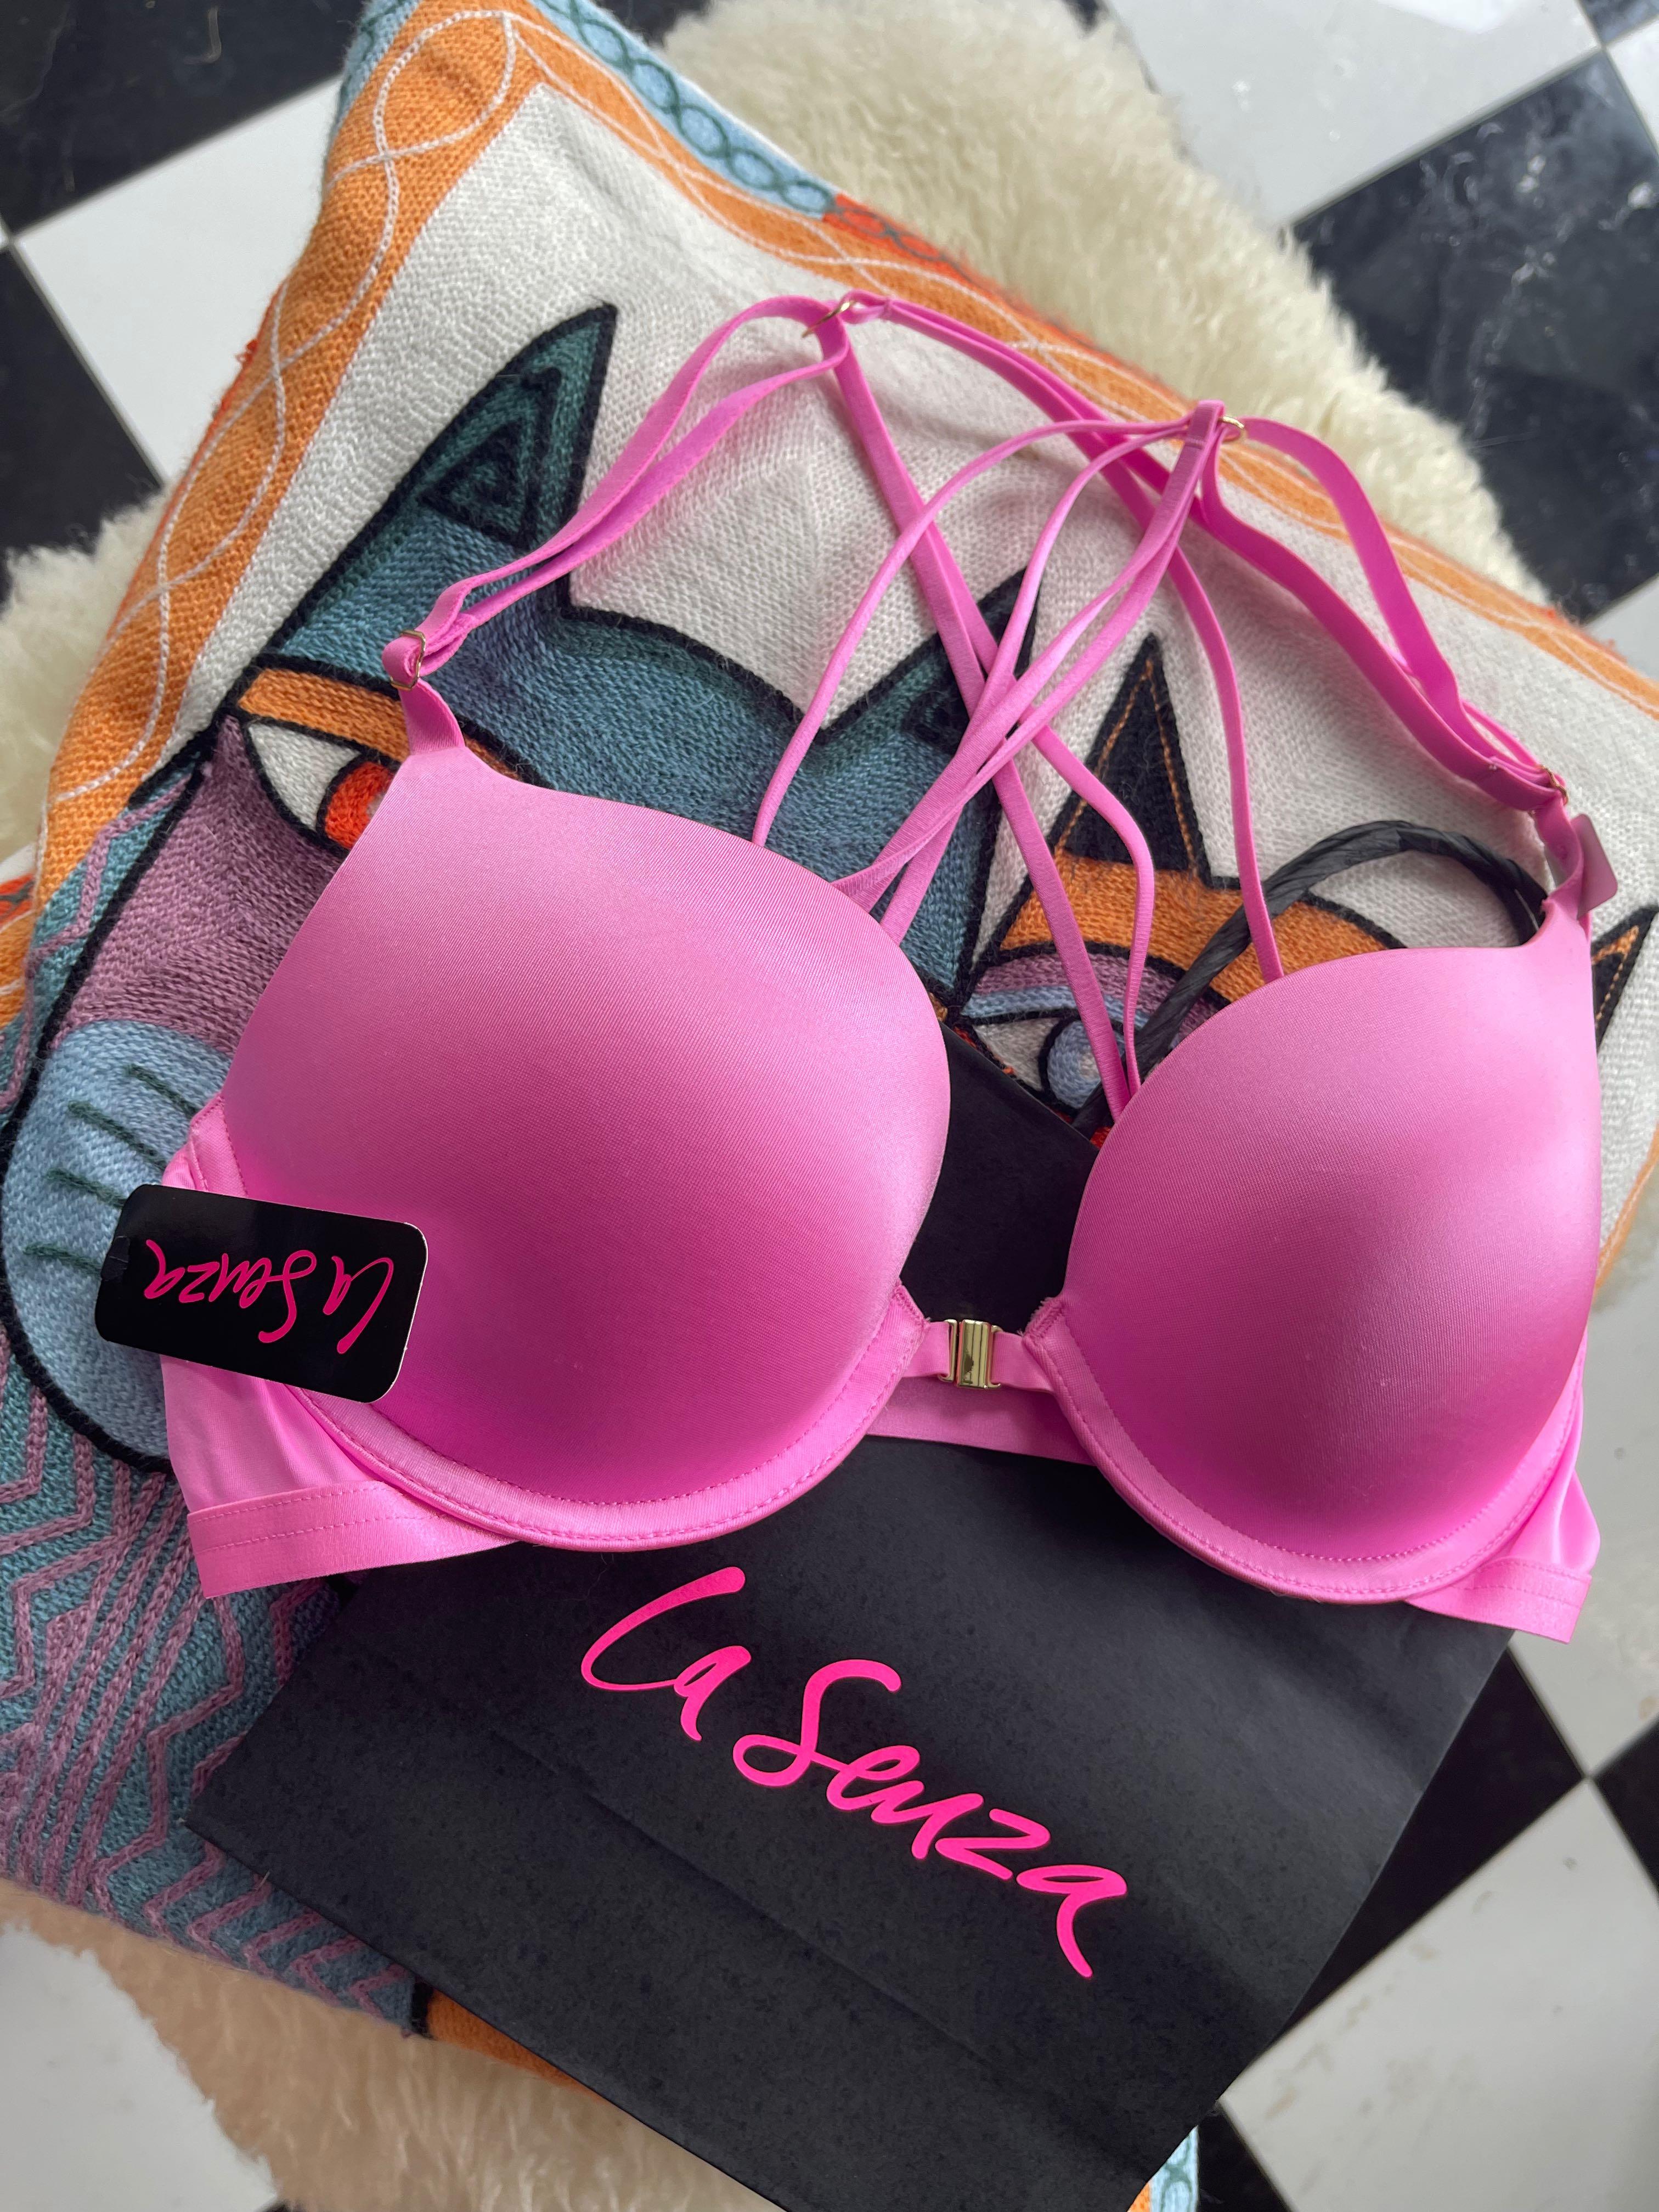 La Senza Bra Padded With Underwire So Free 32 DD Black And Pink